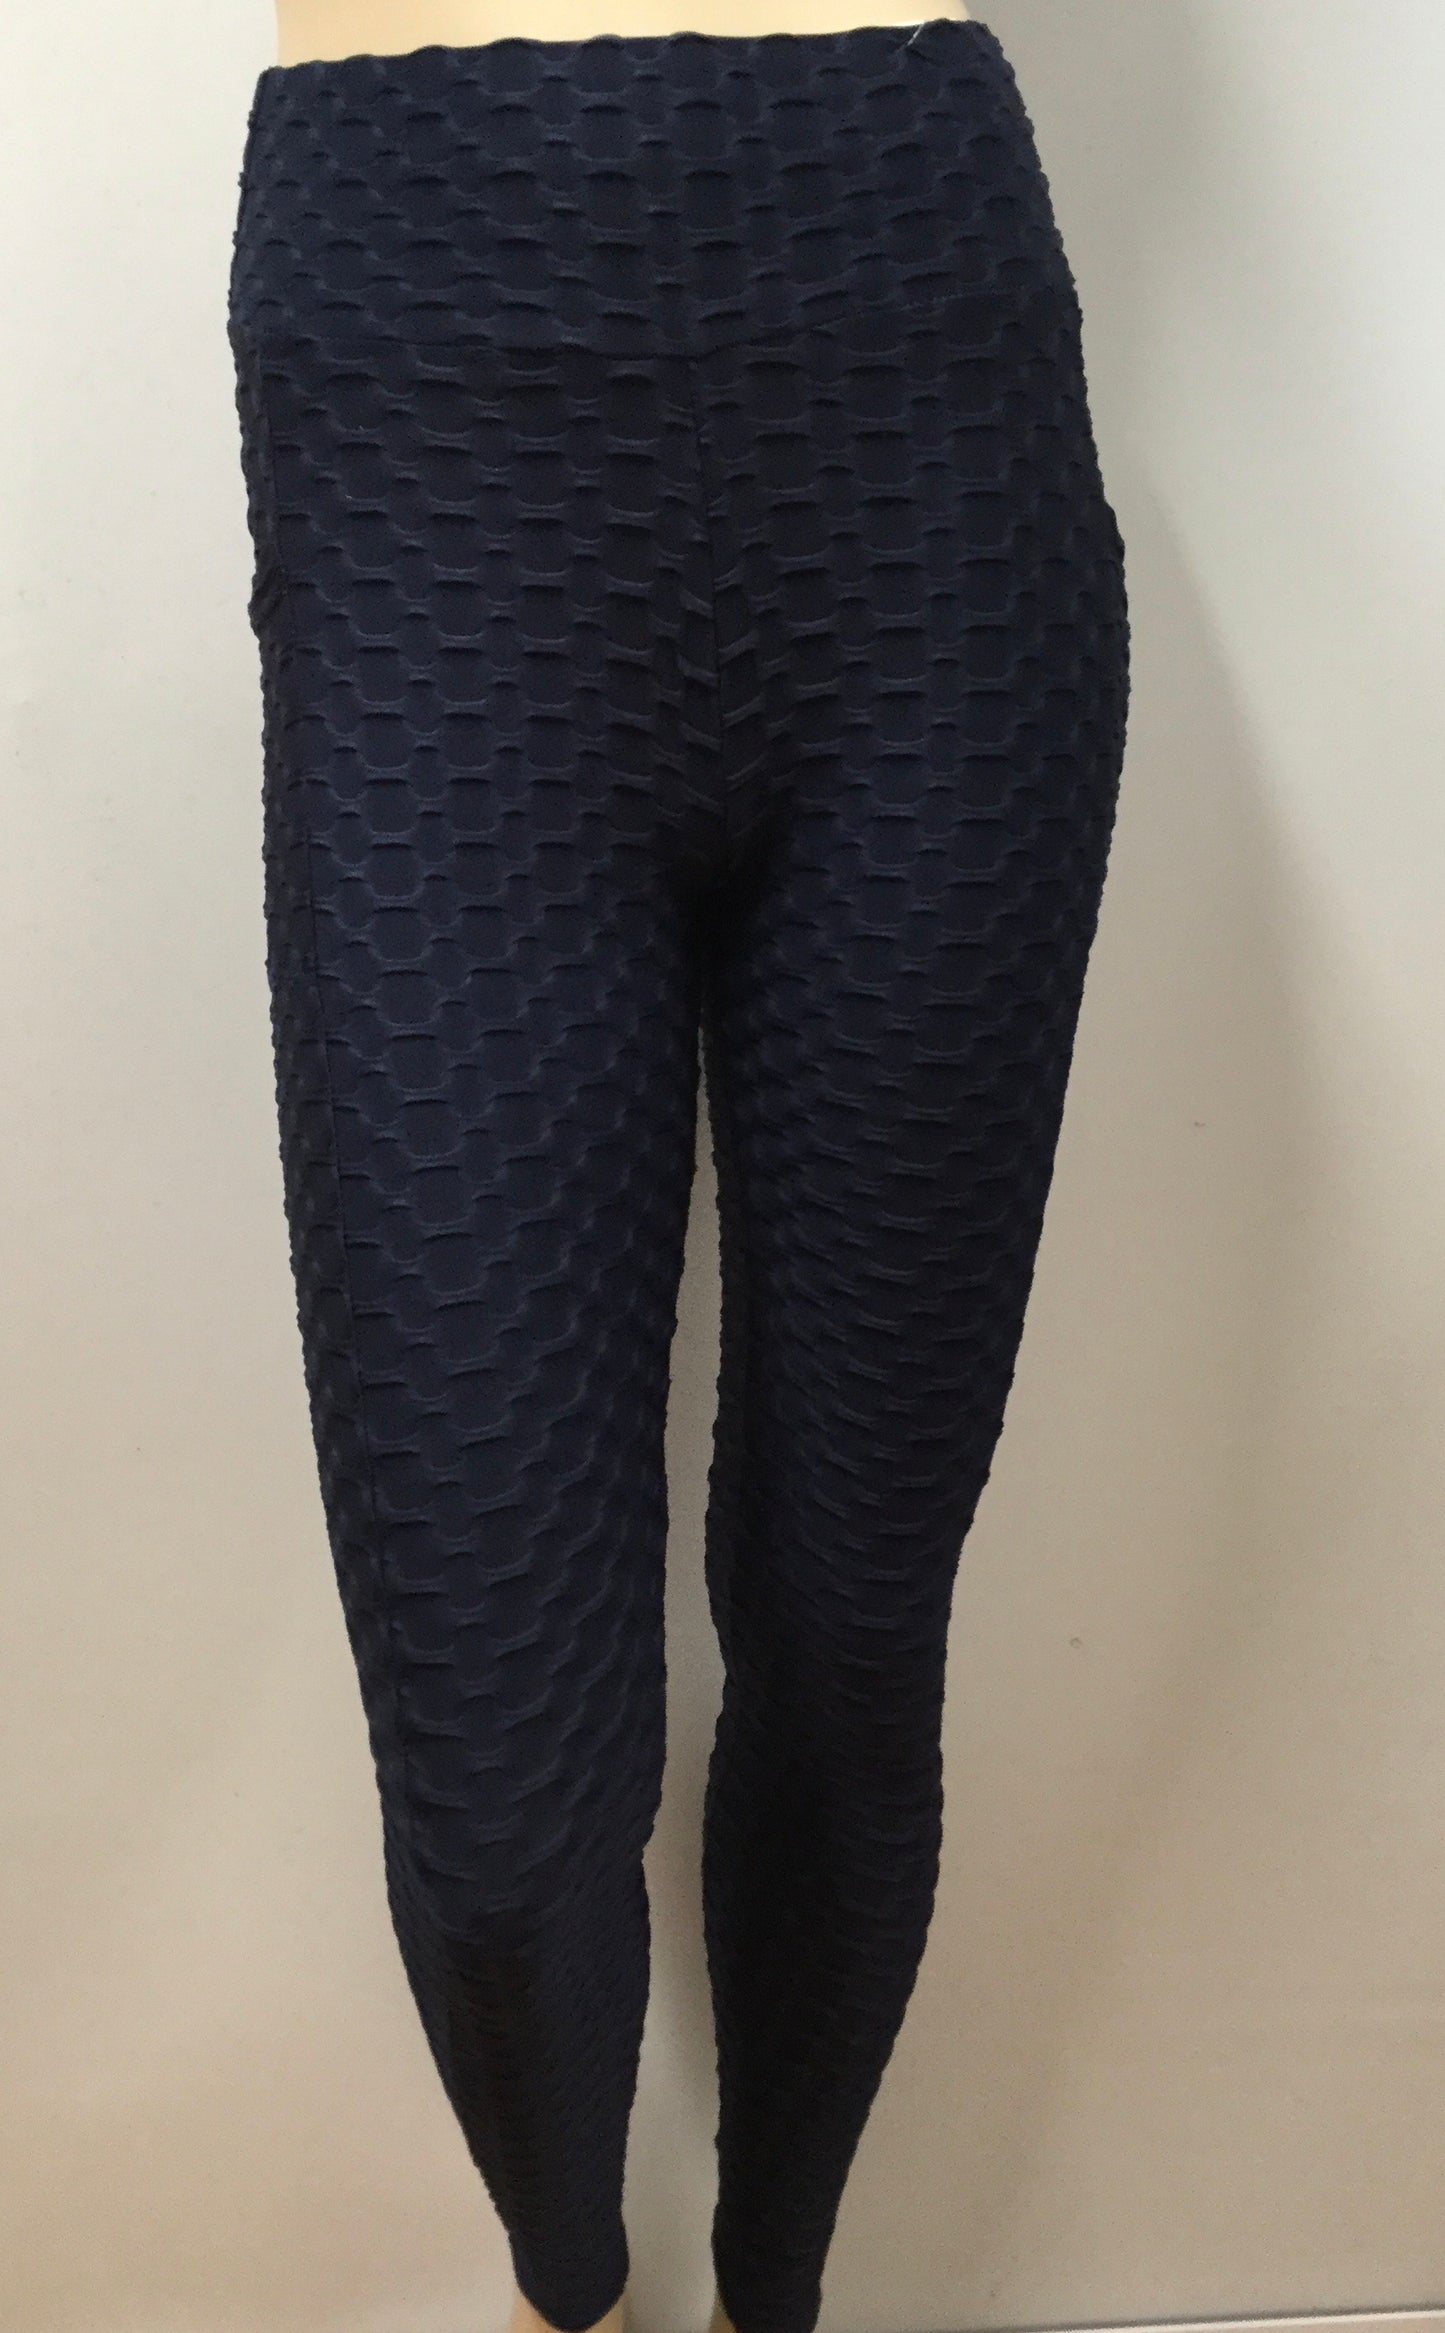 Textured Honeycomb Navy Leggings with pockets